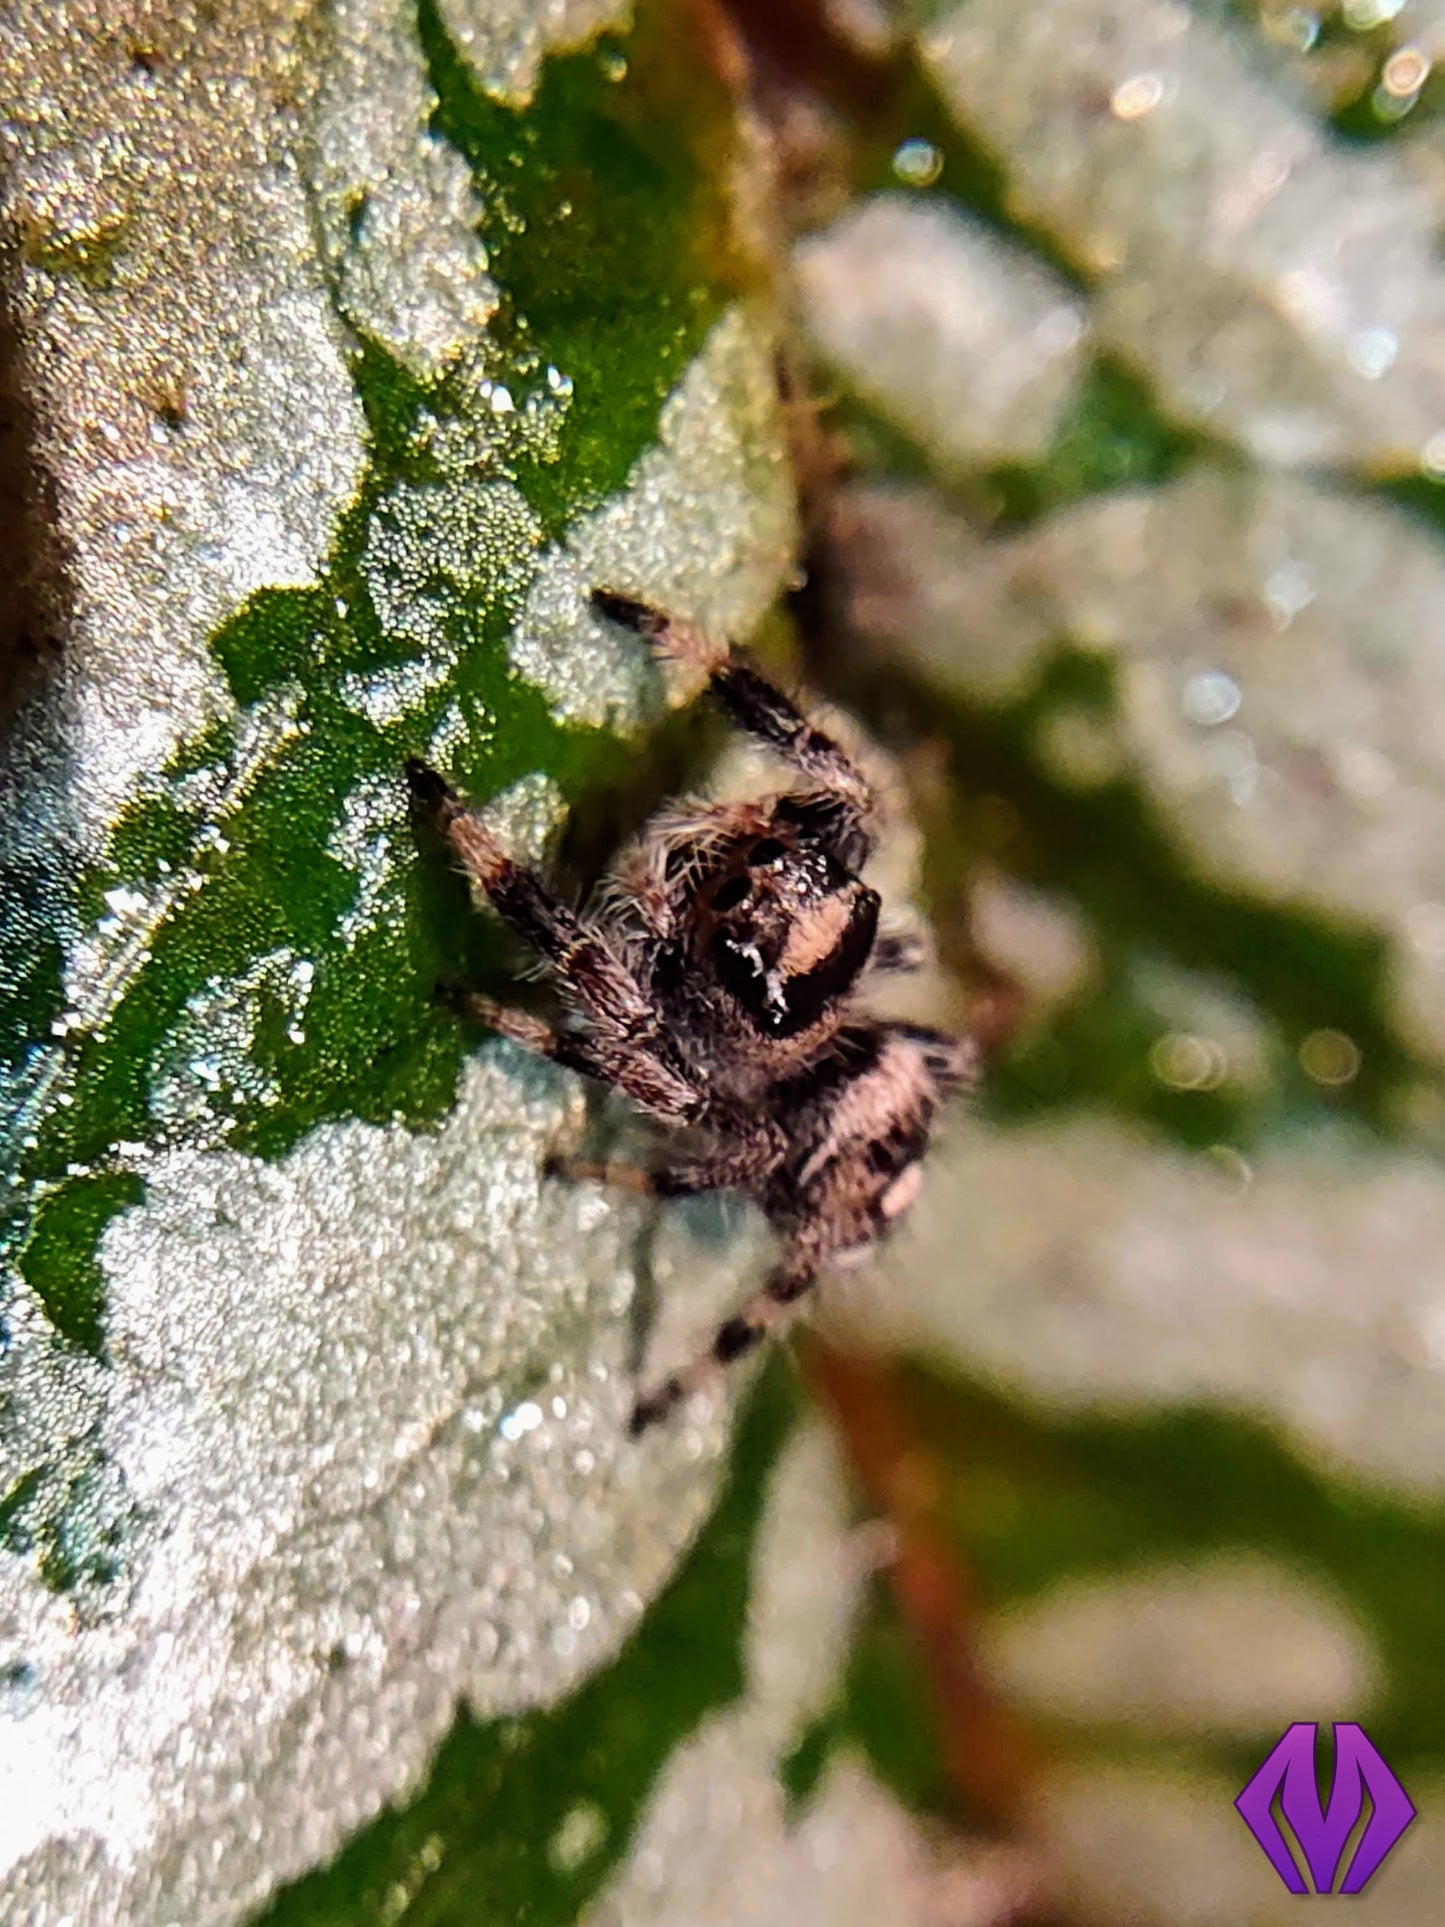 regal jumping spider 5i+ PINK chelicerae